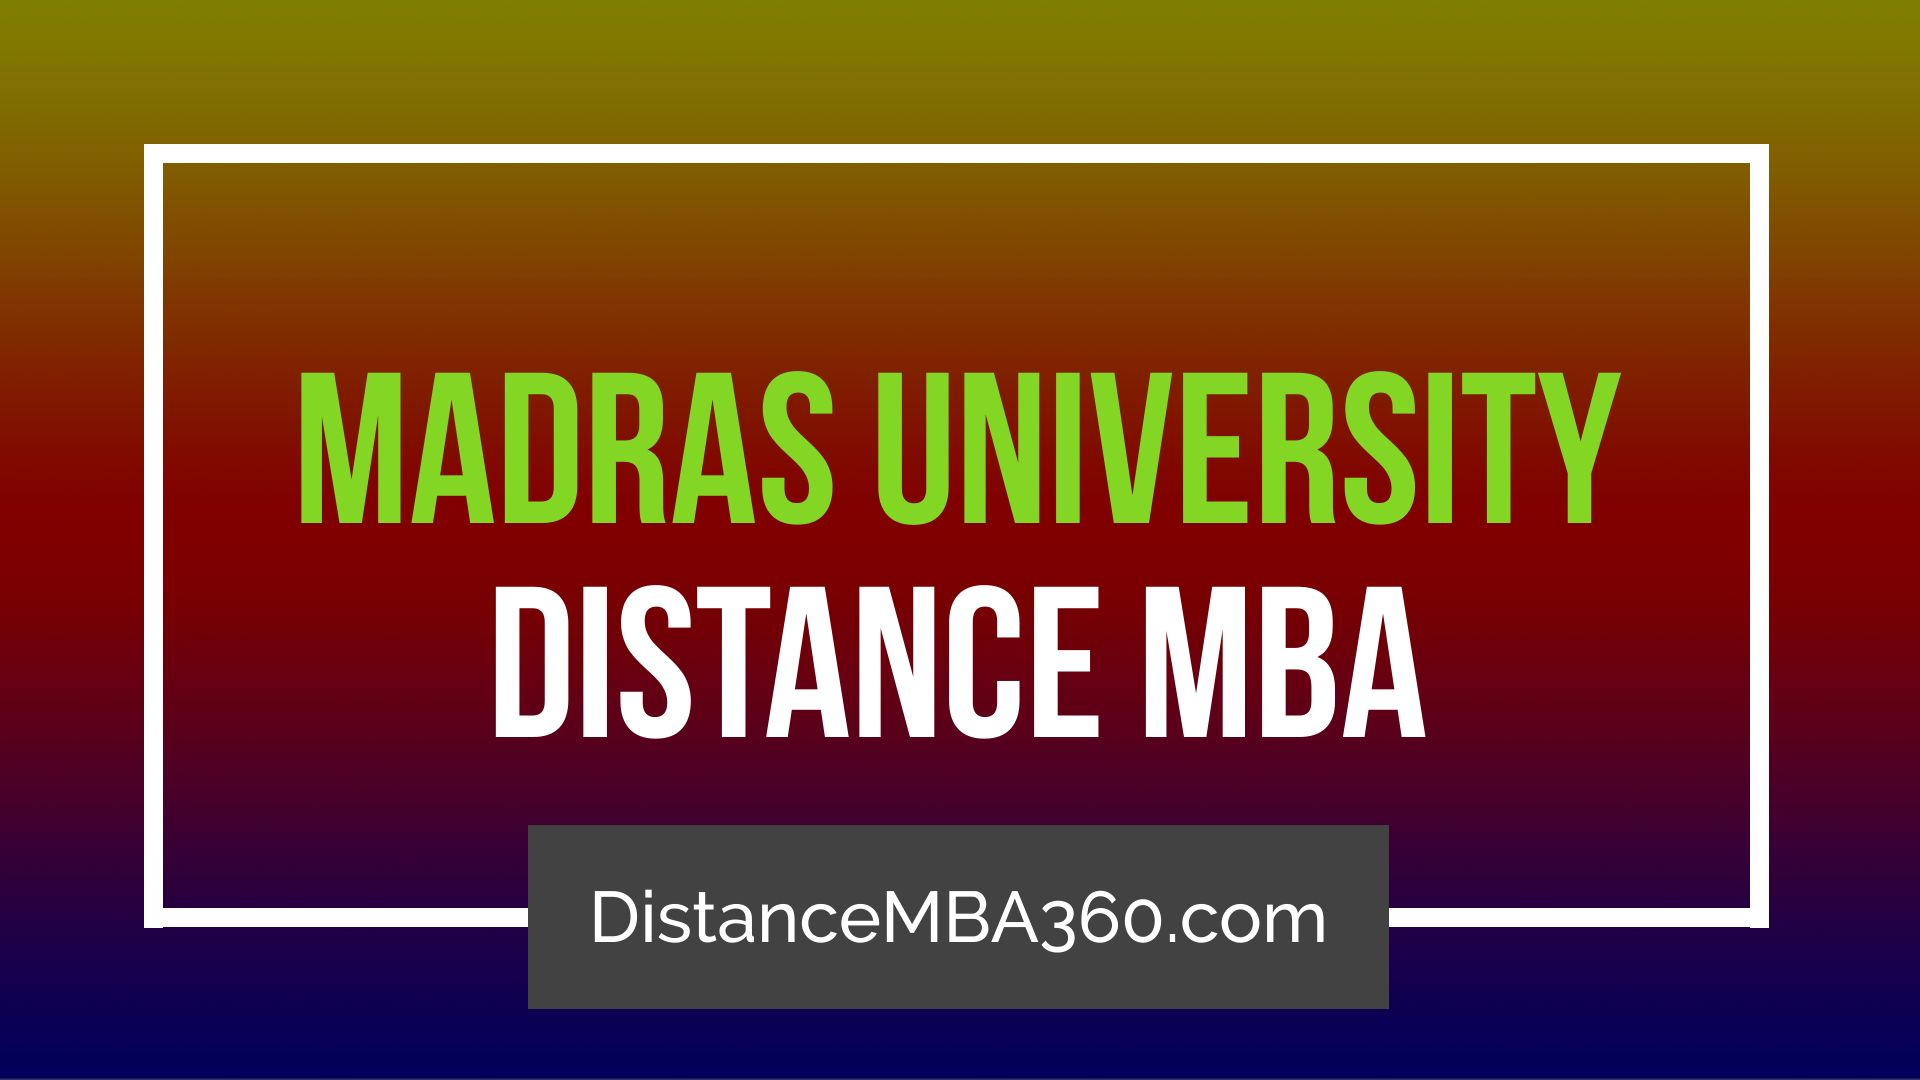 distance education mba courses in madras university